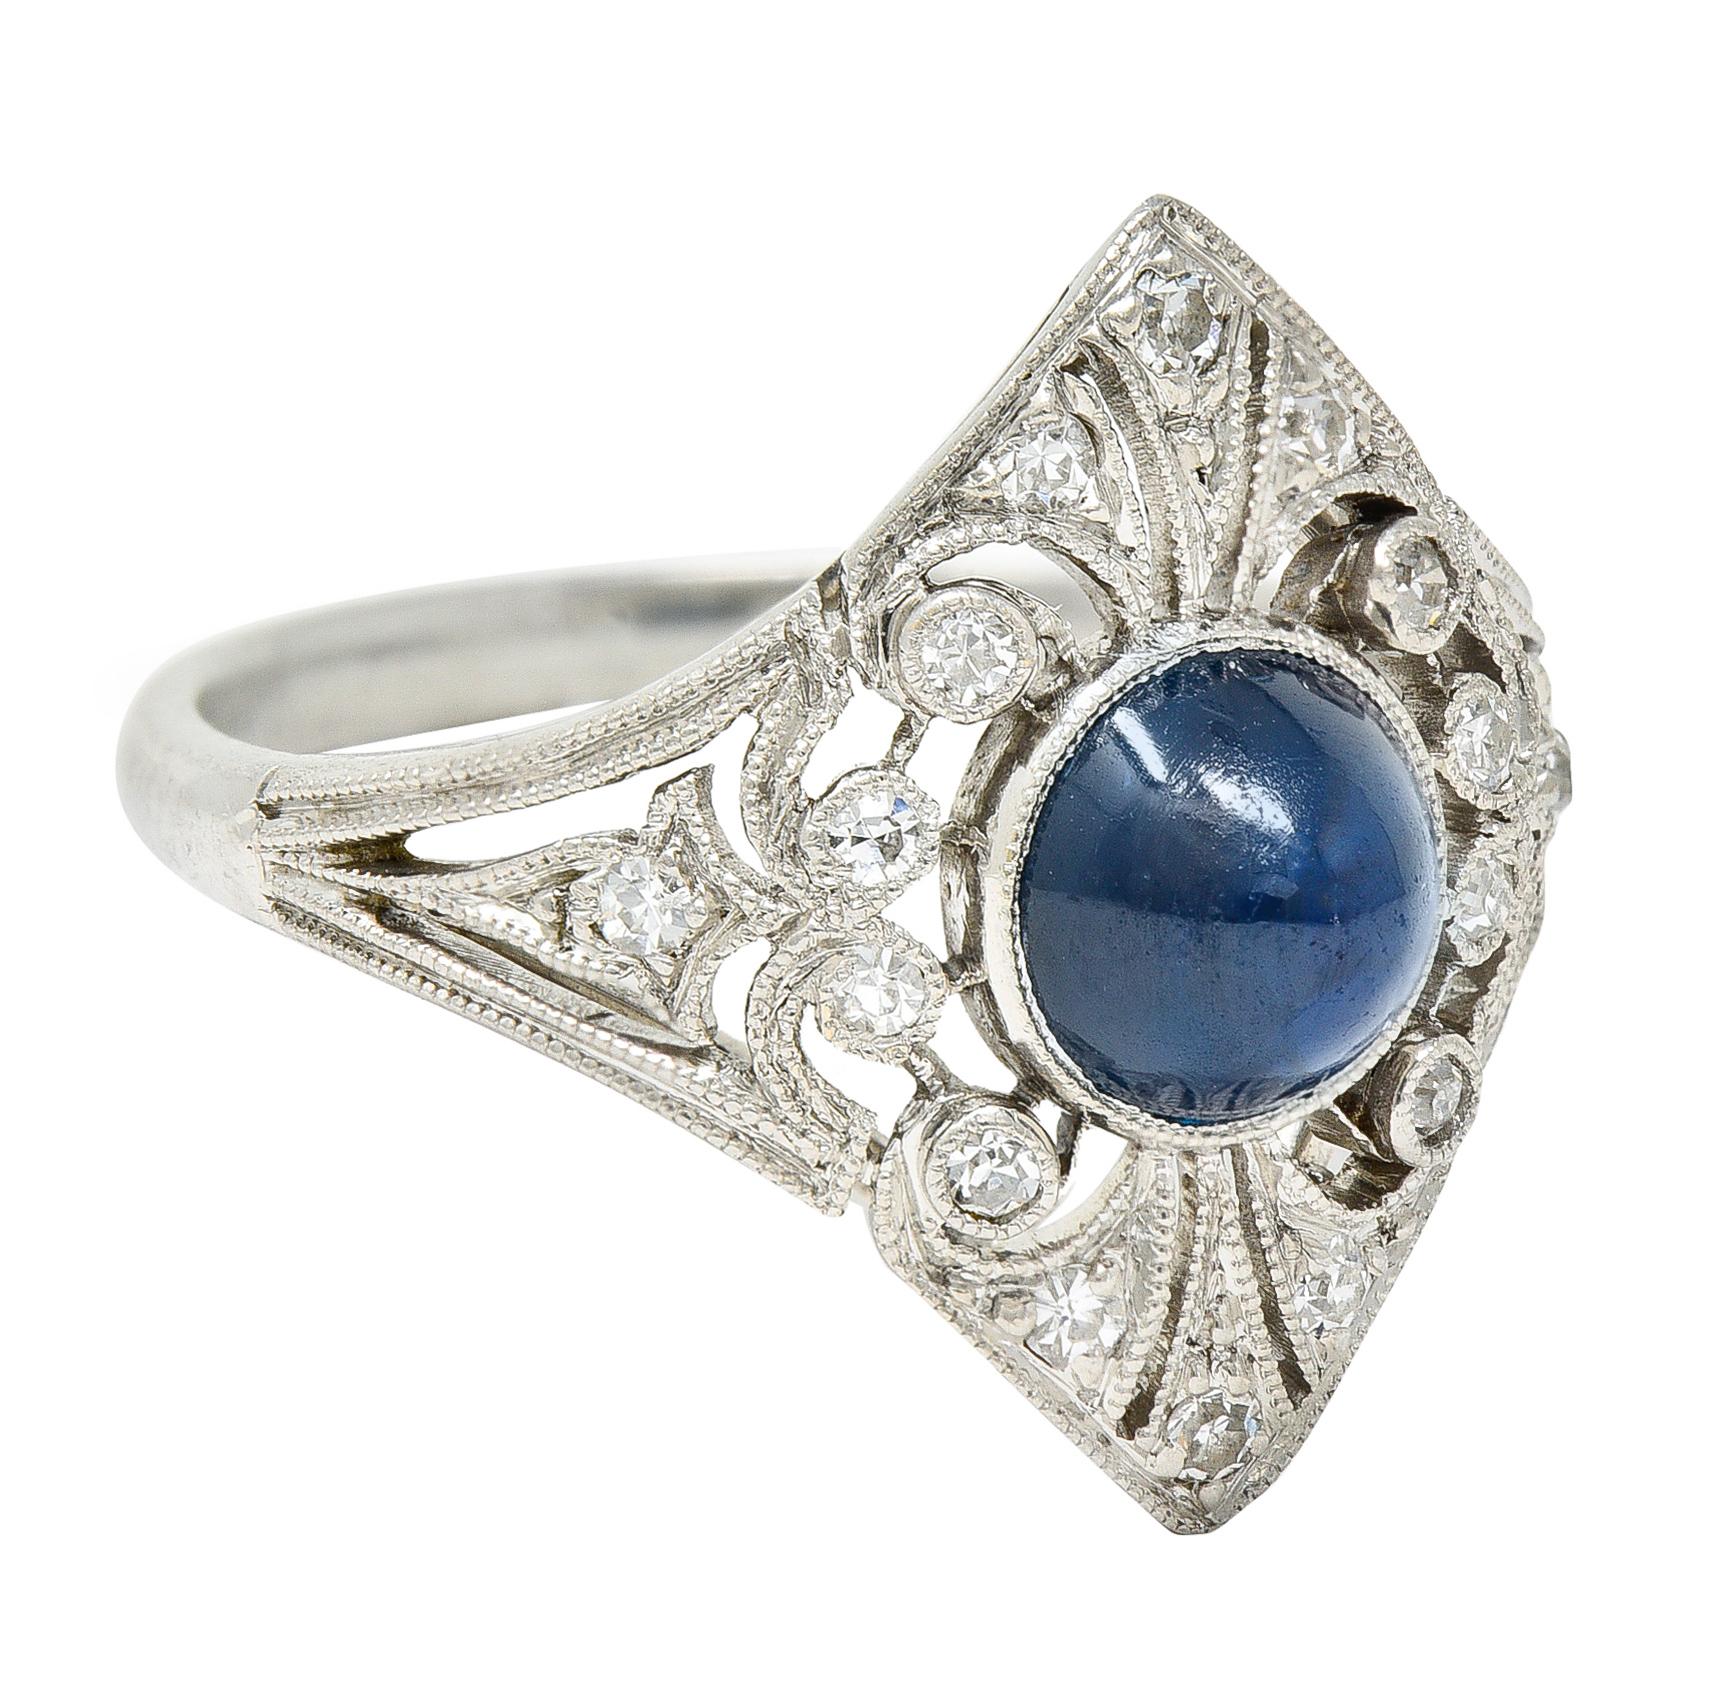 Dinner ring is navette shaped with milgrain detailing and decoratively pierced surface. Centering a bullet cabochon sapphire weighing approximately 1.60 carats. Medium dark and very slightly greenish blue in color - eye clean. Surrounded by single